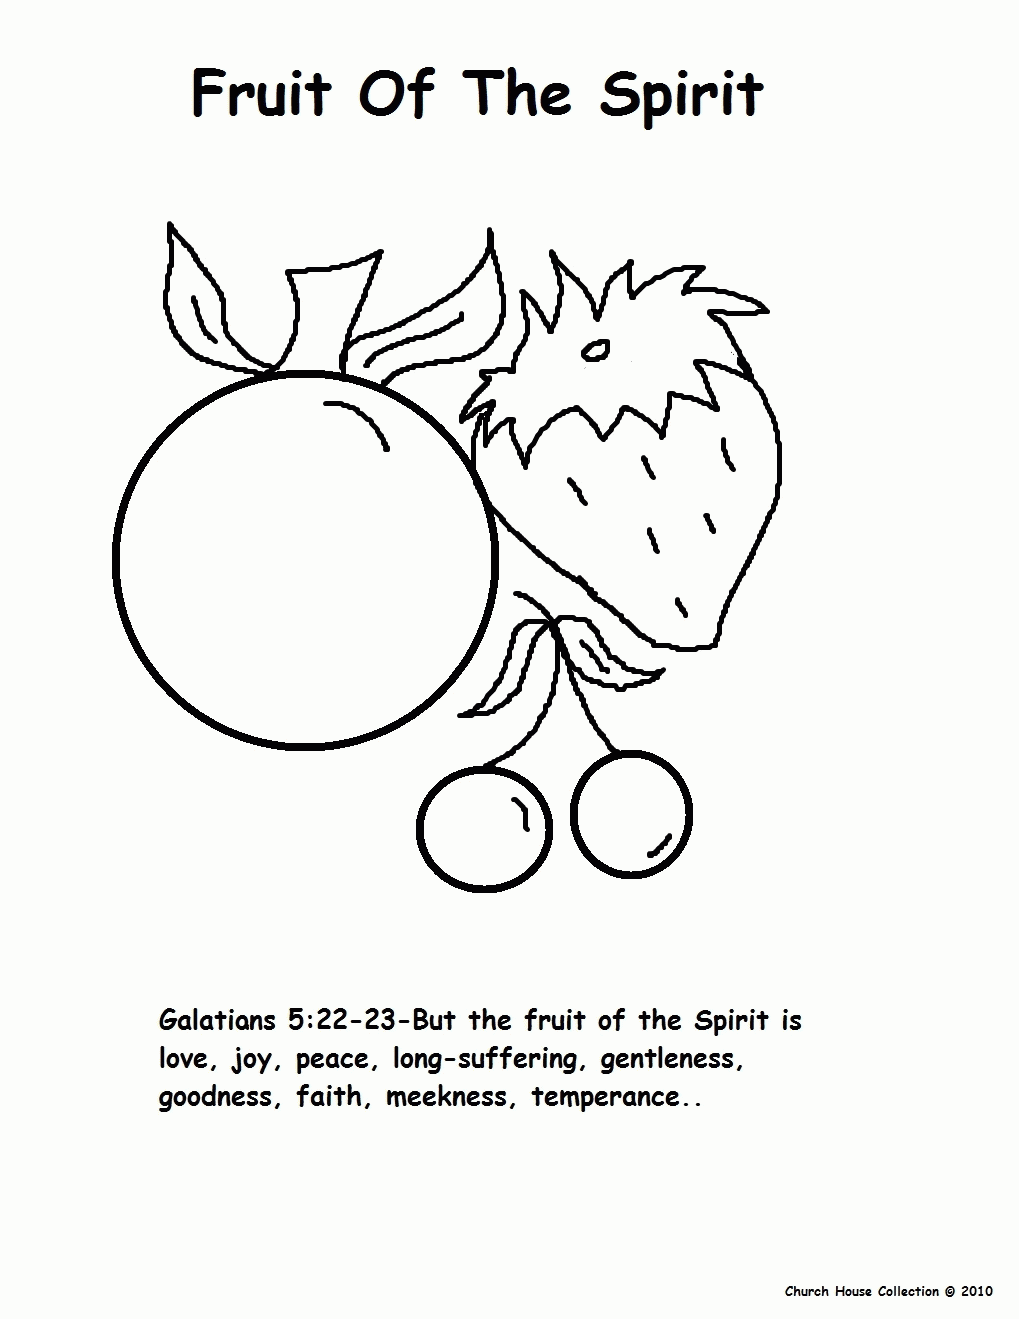 Fruits of the spirit worksheet coloring pages Regarding Fruits Of The Spirit Worksheet